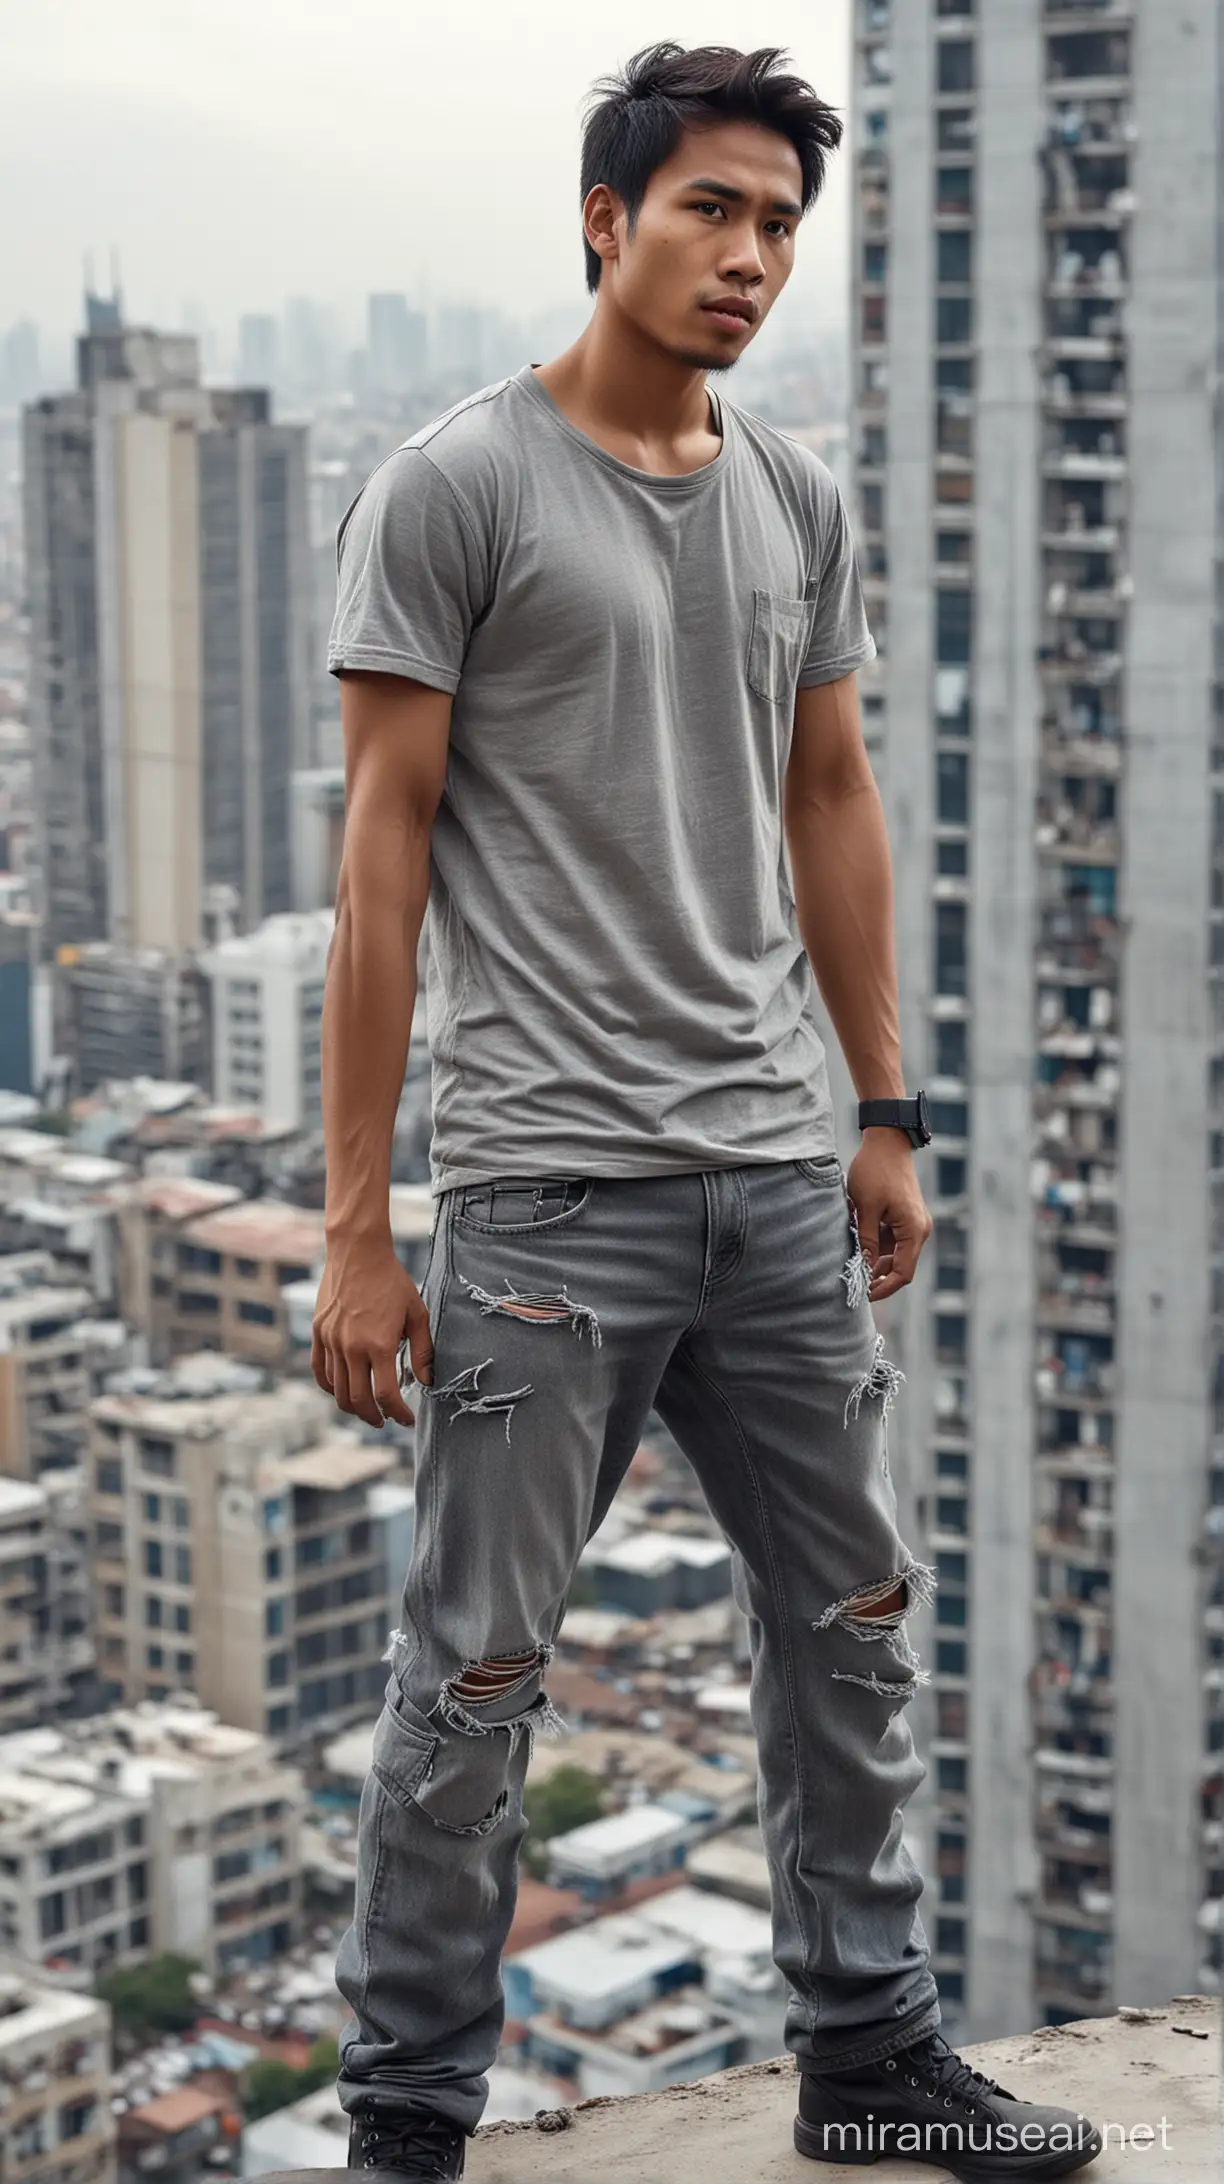 Indonesian Man Standing Tall on Urban Rooftop